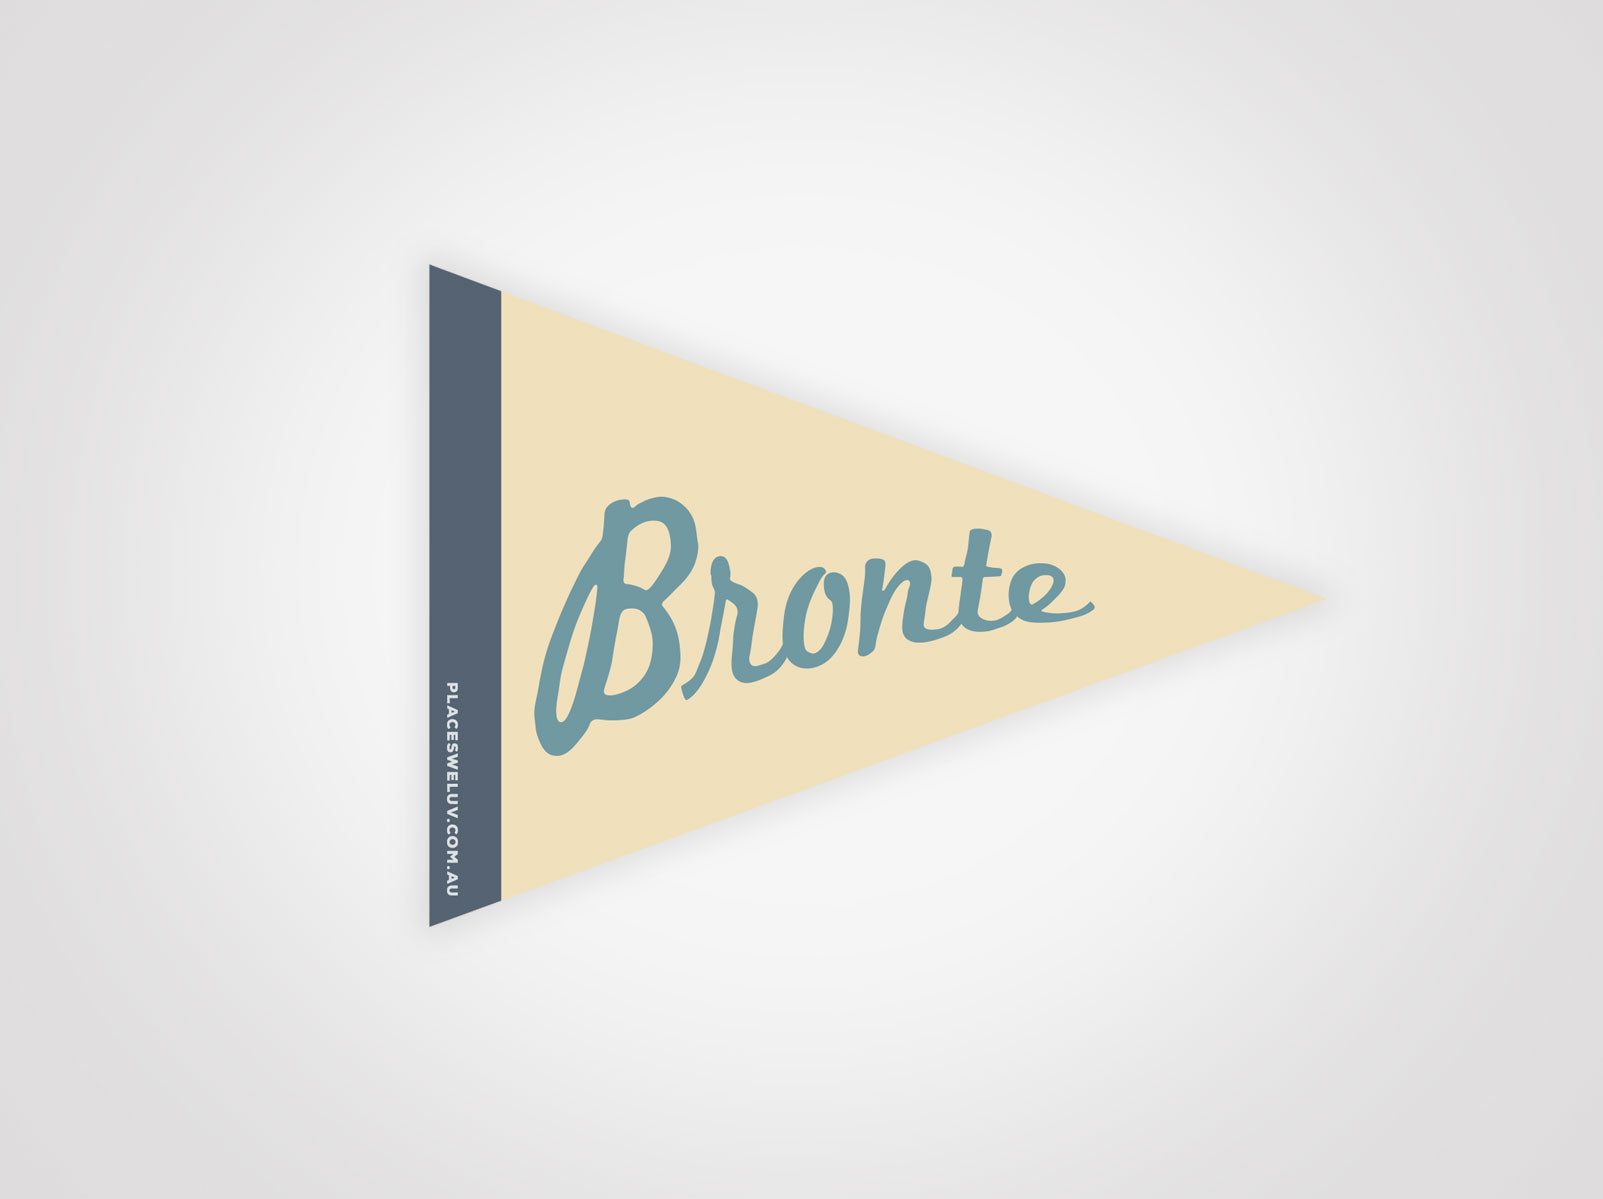 Bronte retro vintage travel decal by places we luv